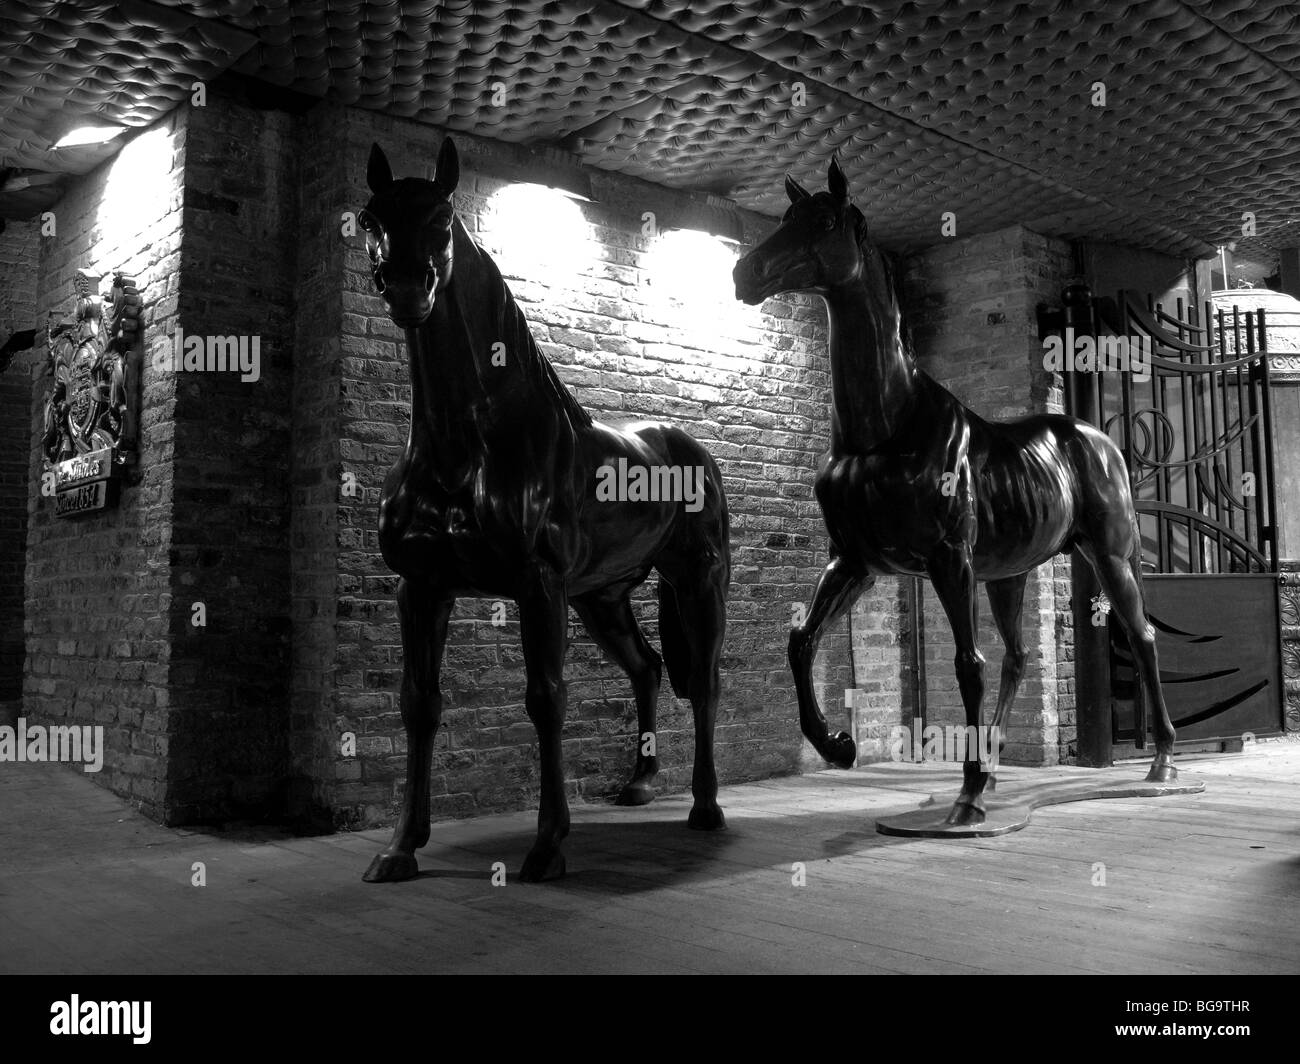 Horse Statues at Stable Market, Camden, London Stock Photo